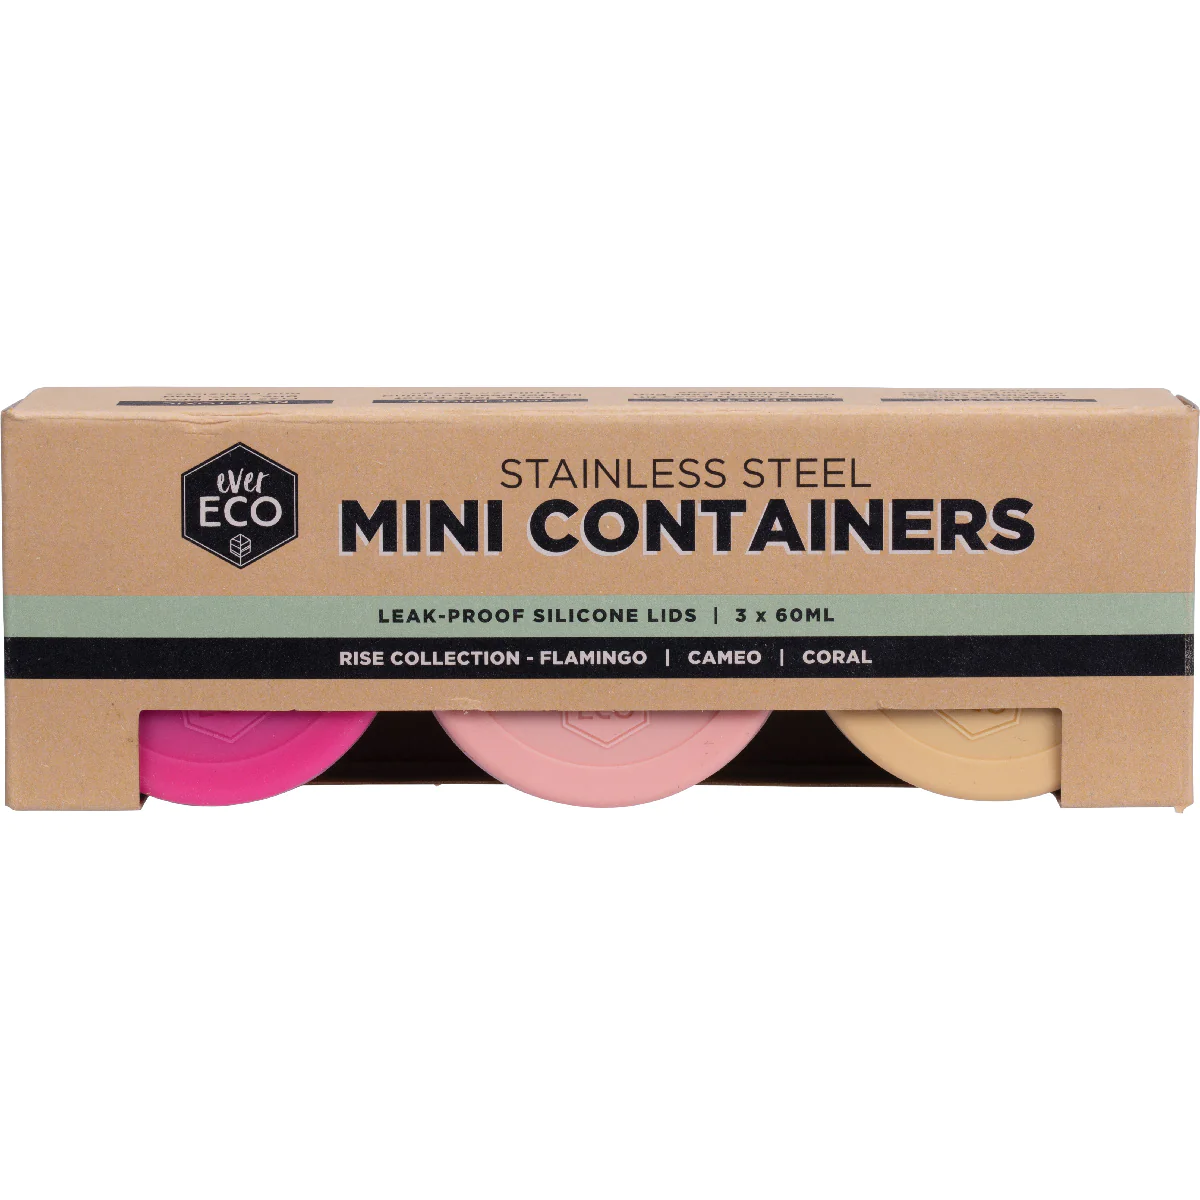 Ever Eco Stainless Steel Mini Containers 3x60ml, Rise